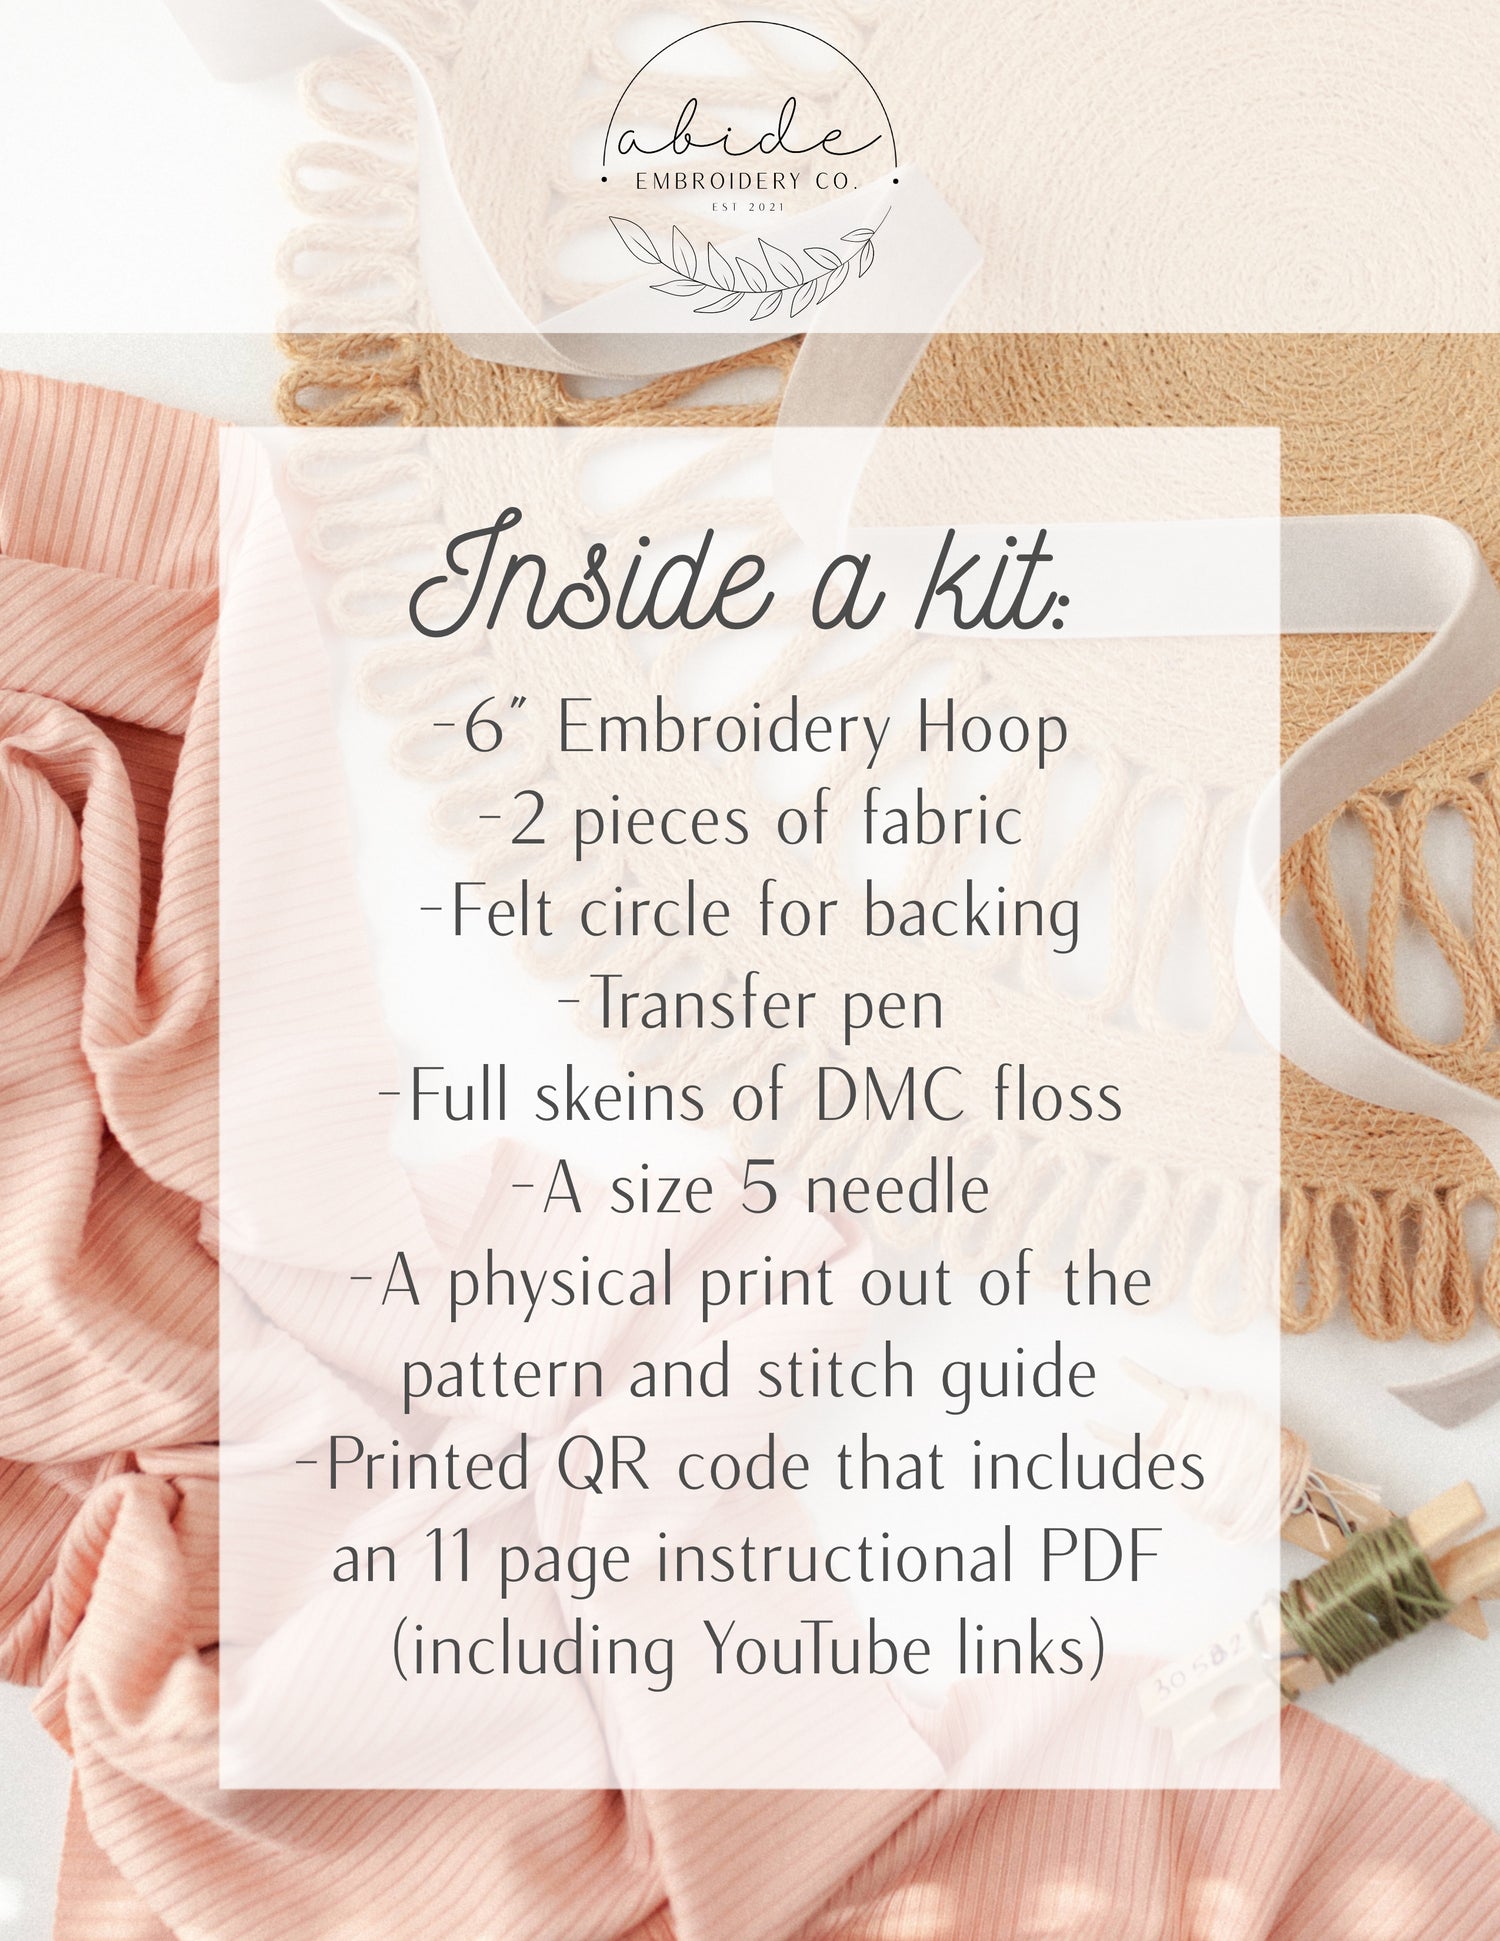 13-Stitch Practice Guide Kit, Embroidery Kit for Beginners - Abide Embroidery Co.